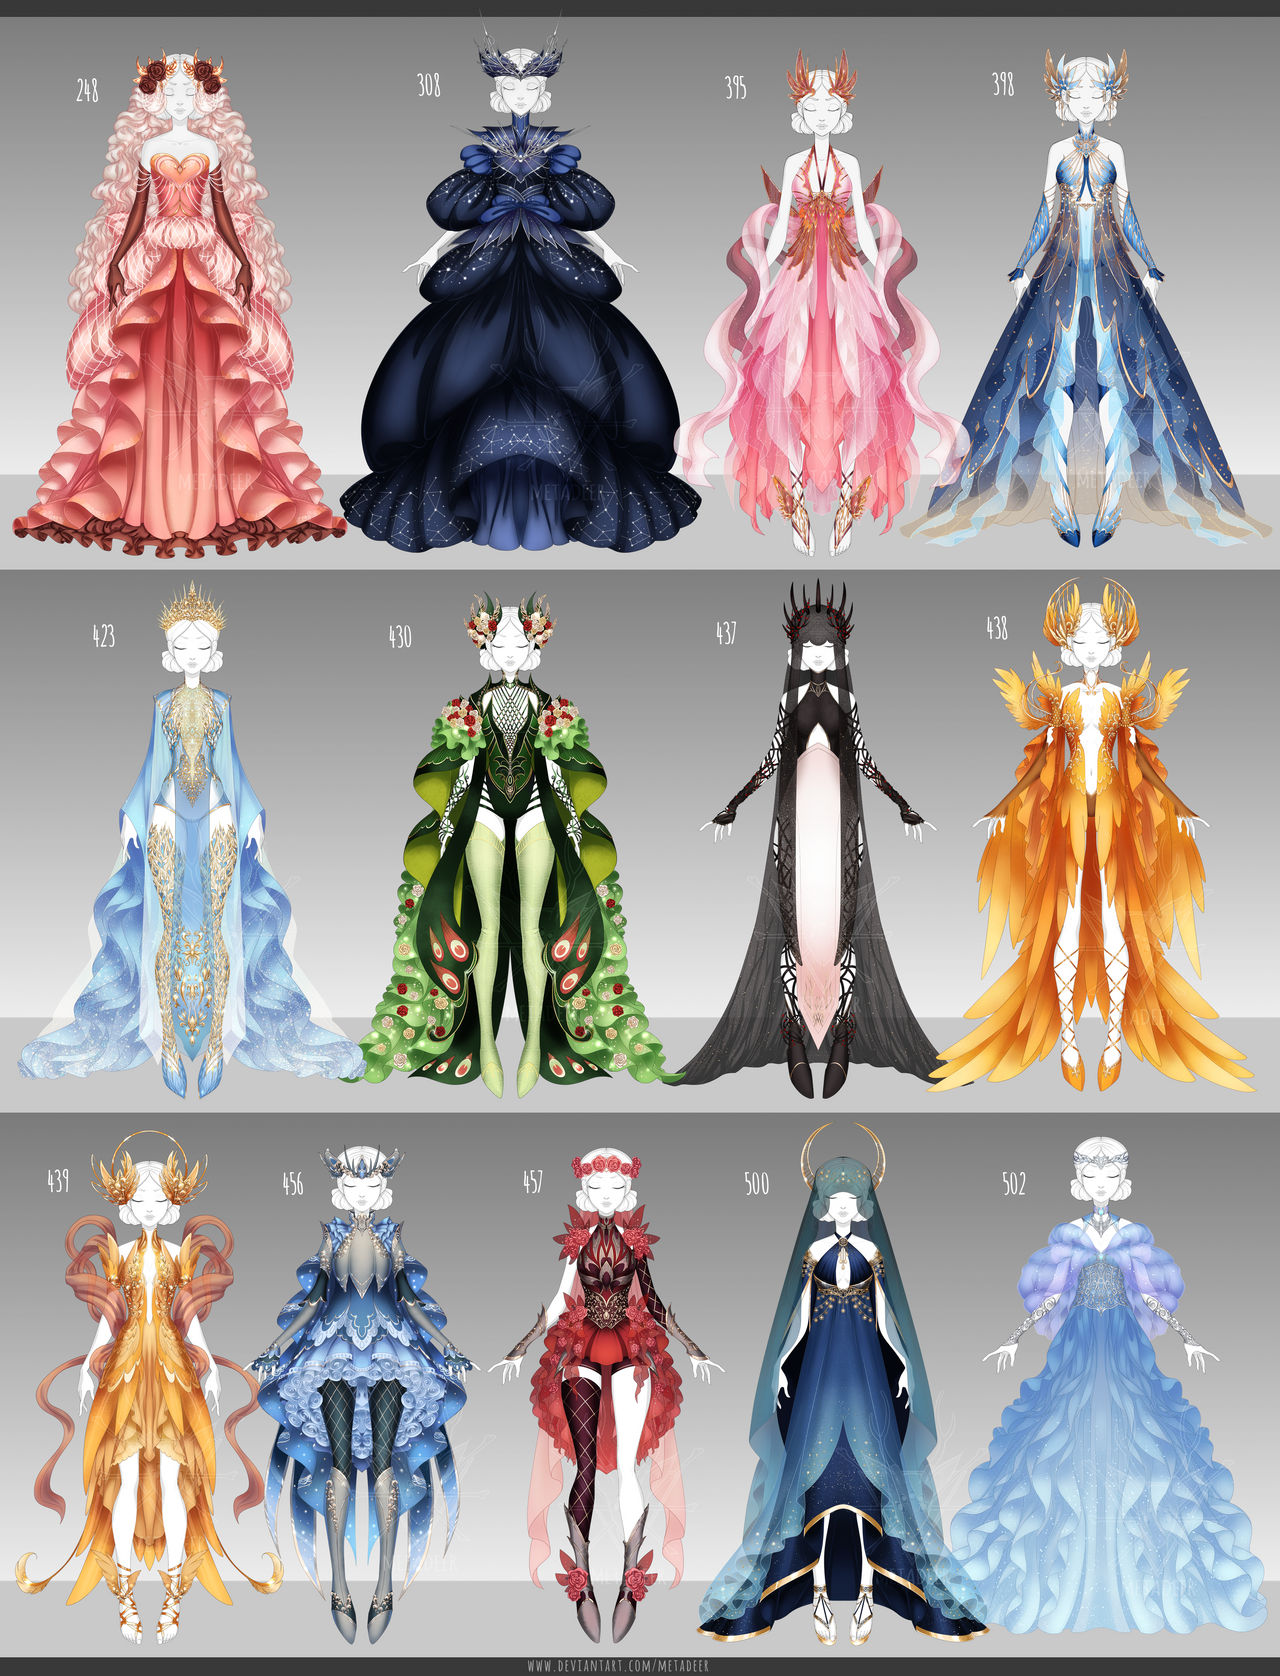 CLOSED] Outfit adopt Clearance Sale| Set Price by metadeer on DeviantArt